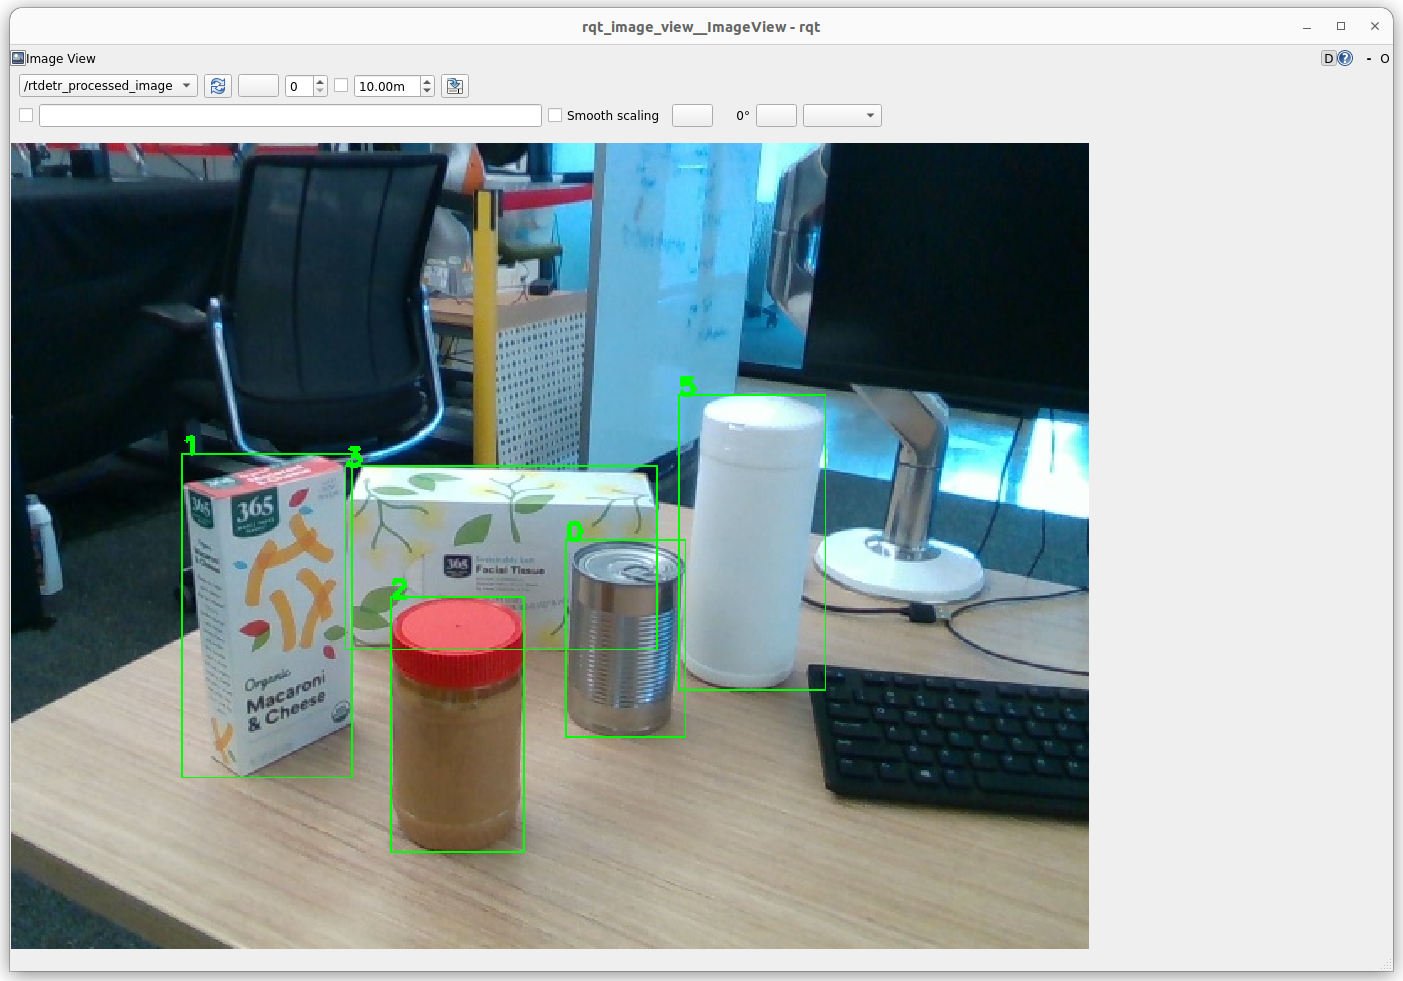 RQT showing detection of grocery objects